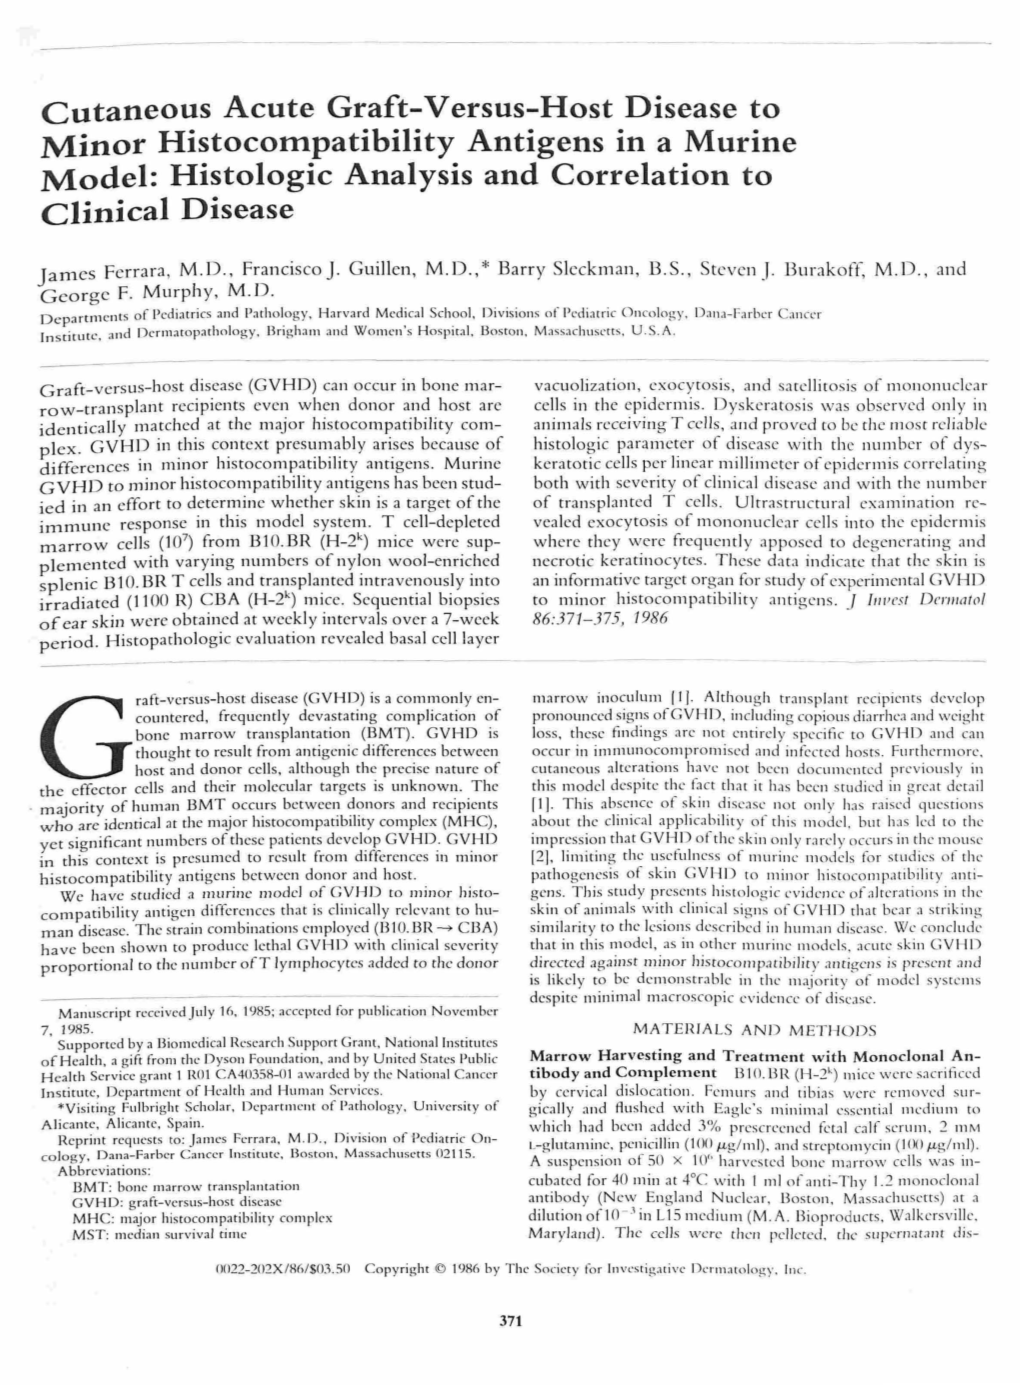 Cutaneous Acute Graft-Versus-Host Disease to Minor Histocompatibility Antigens in a Murine Model: Histologic Analysis and Correlation to Clinical Disease